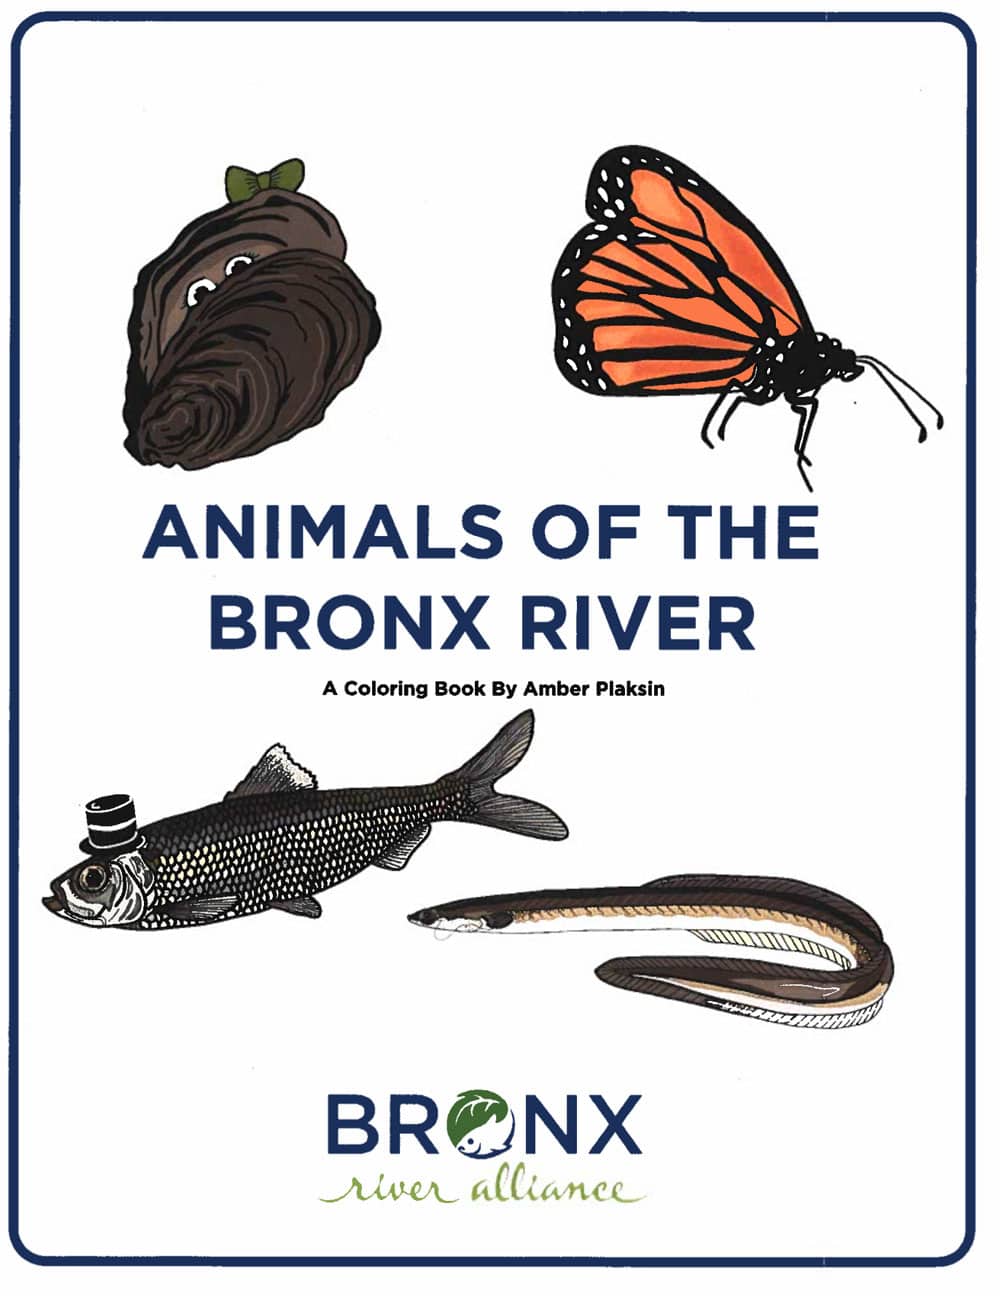 Coloring Book: Animals of the Bronx River